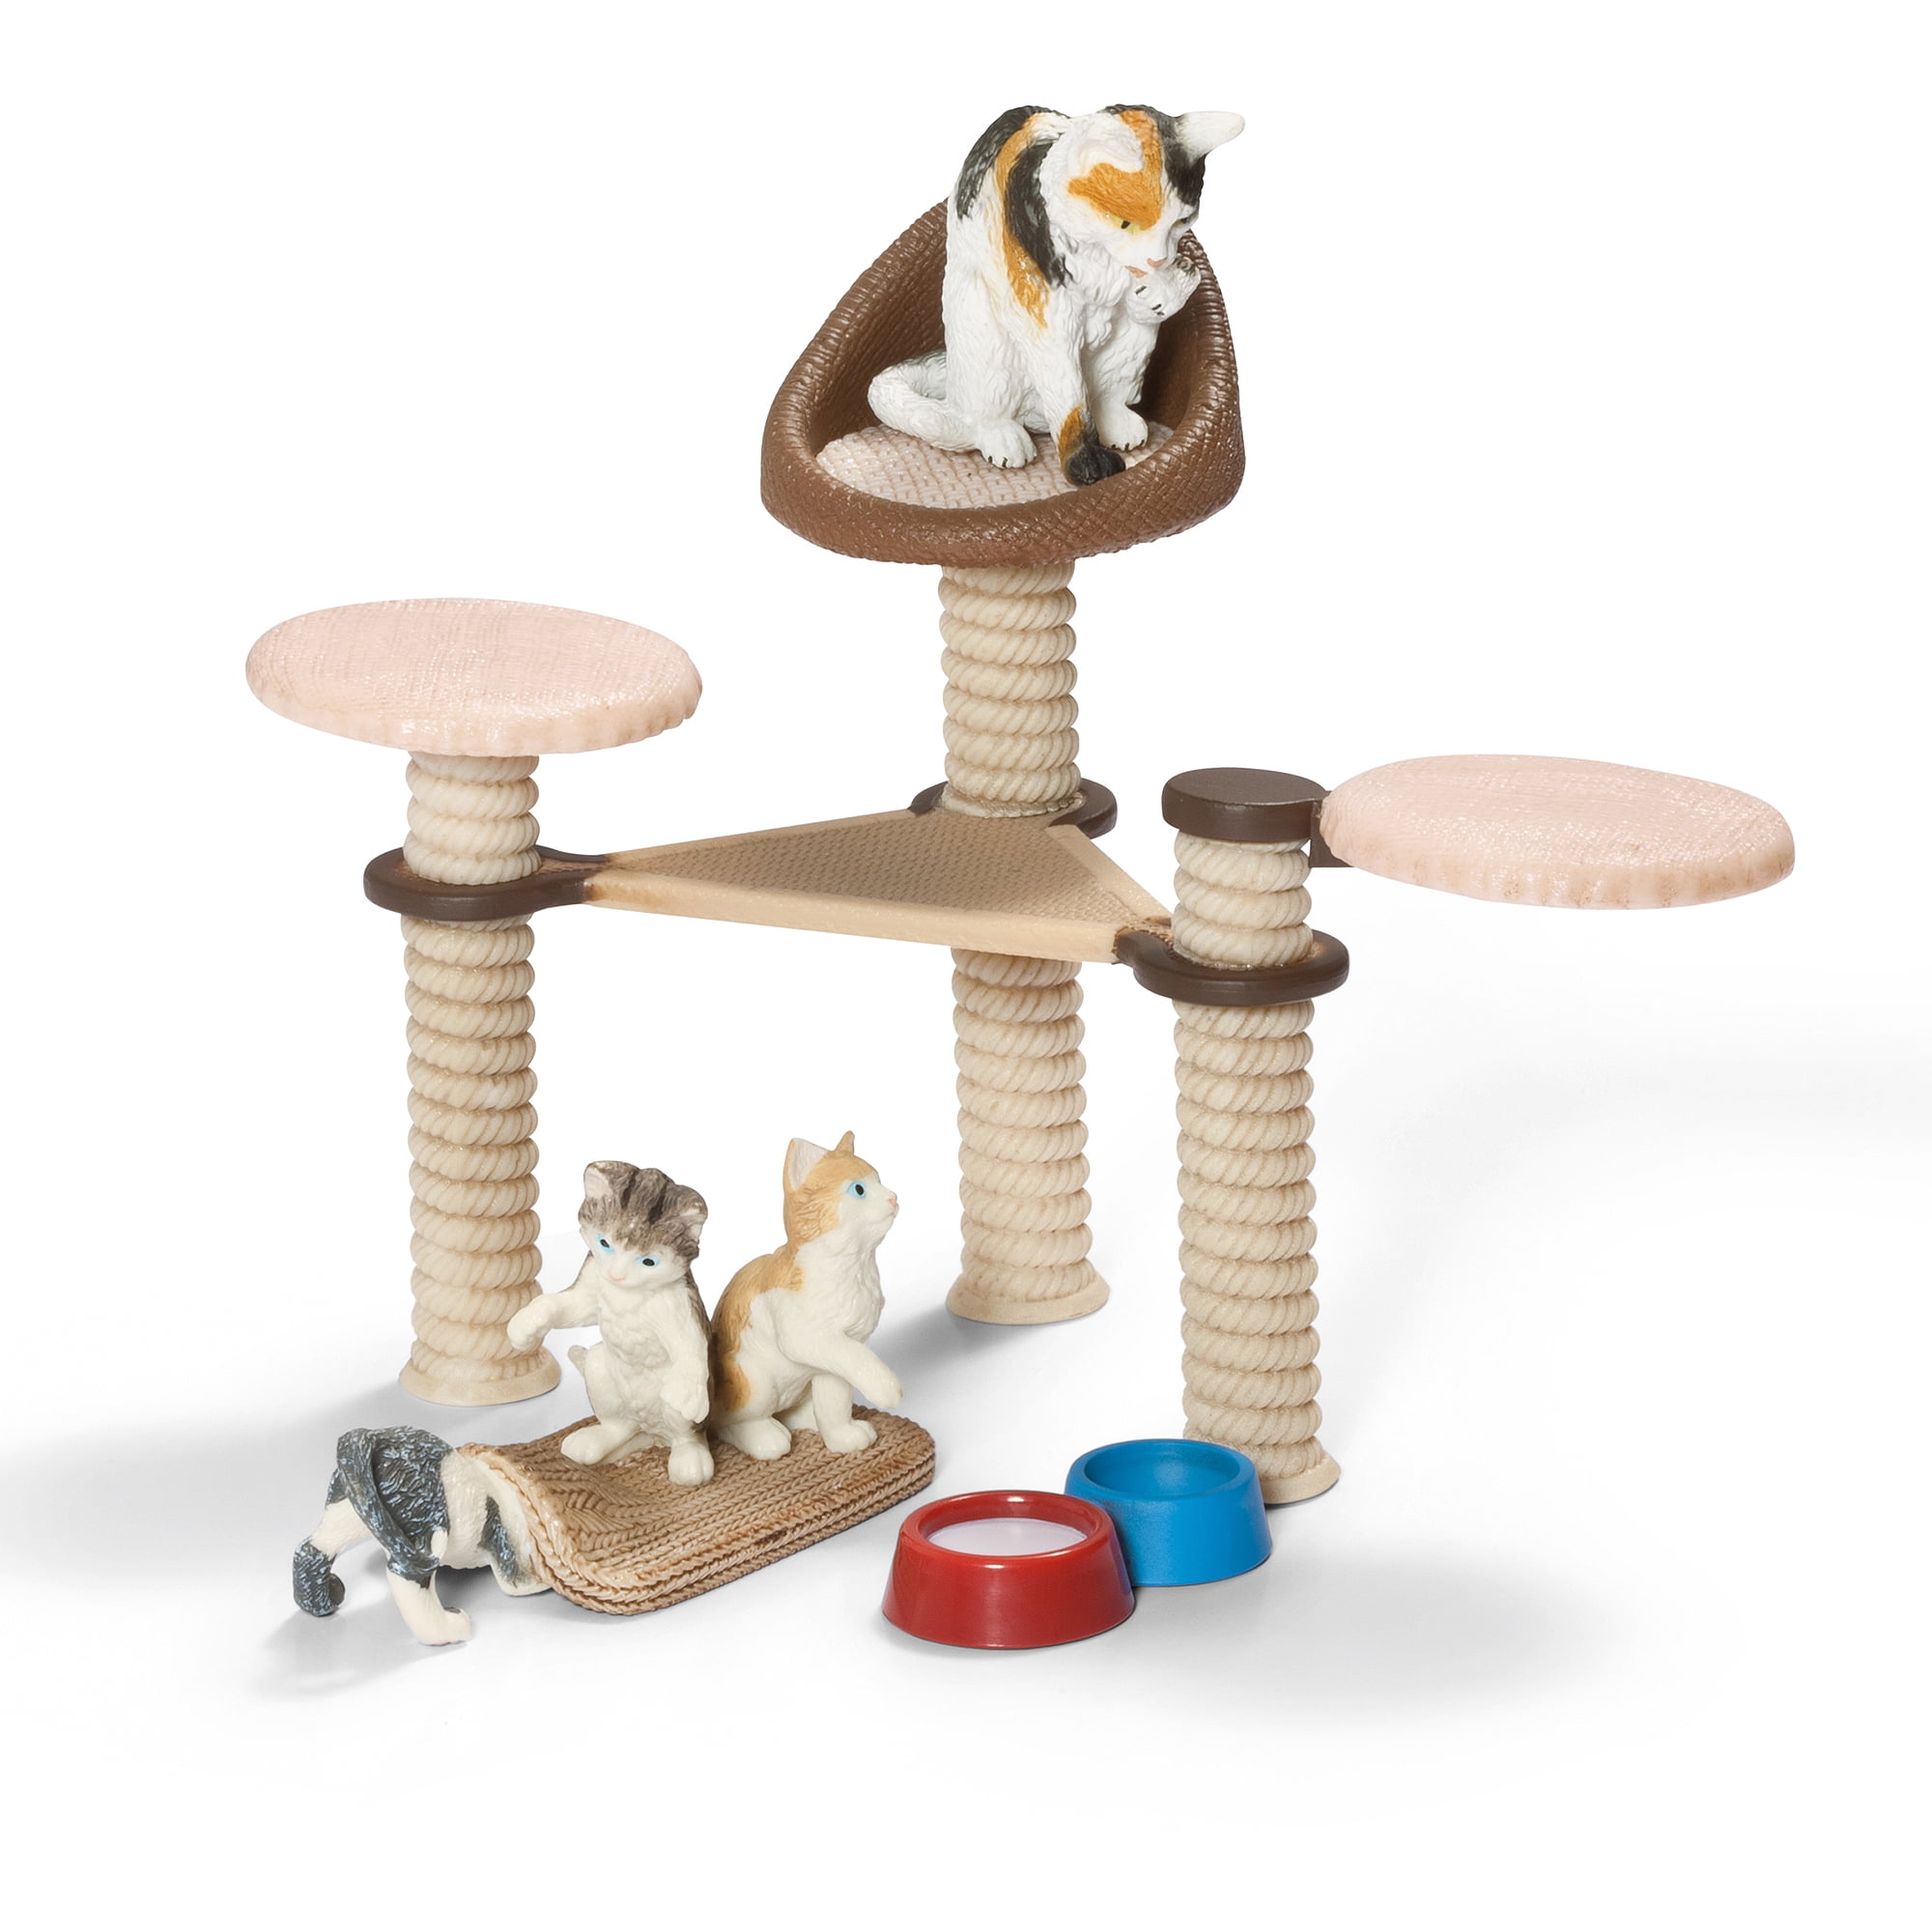 Schleich Cat Sitting Animal Figure NEW IN STOCK Toys 